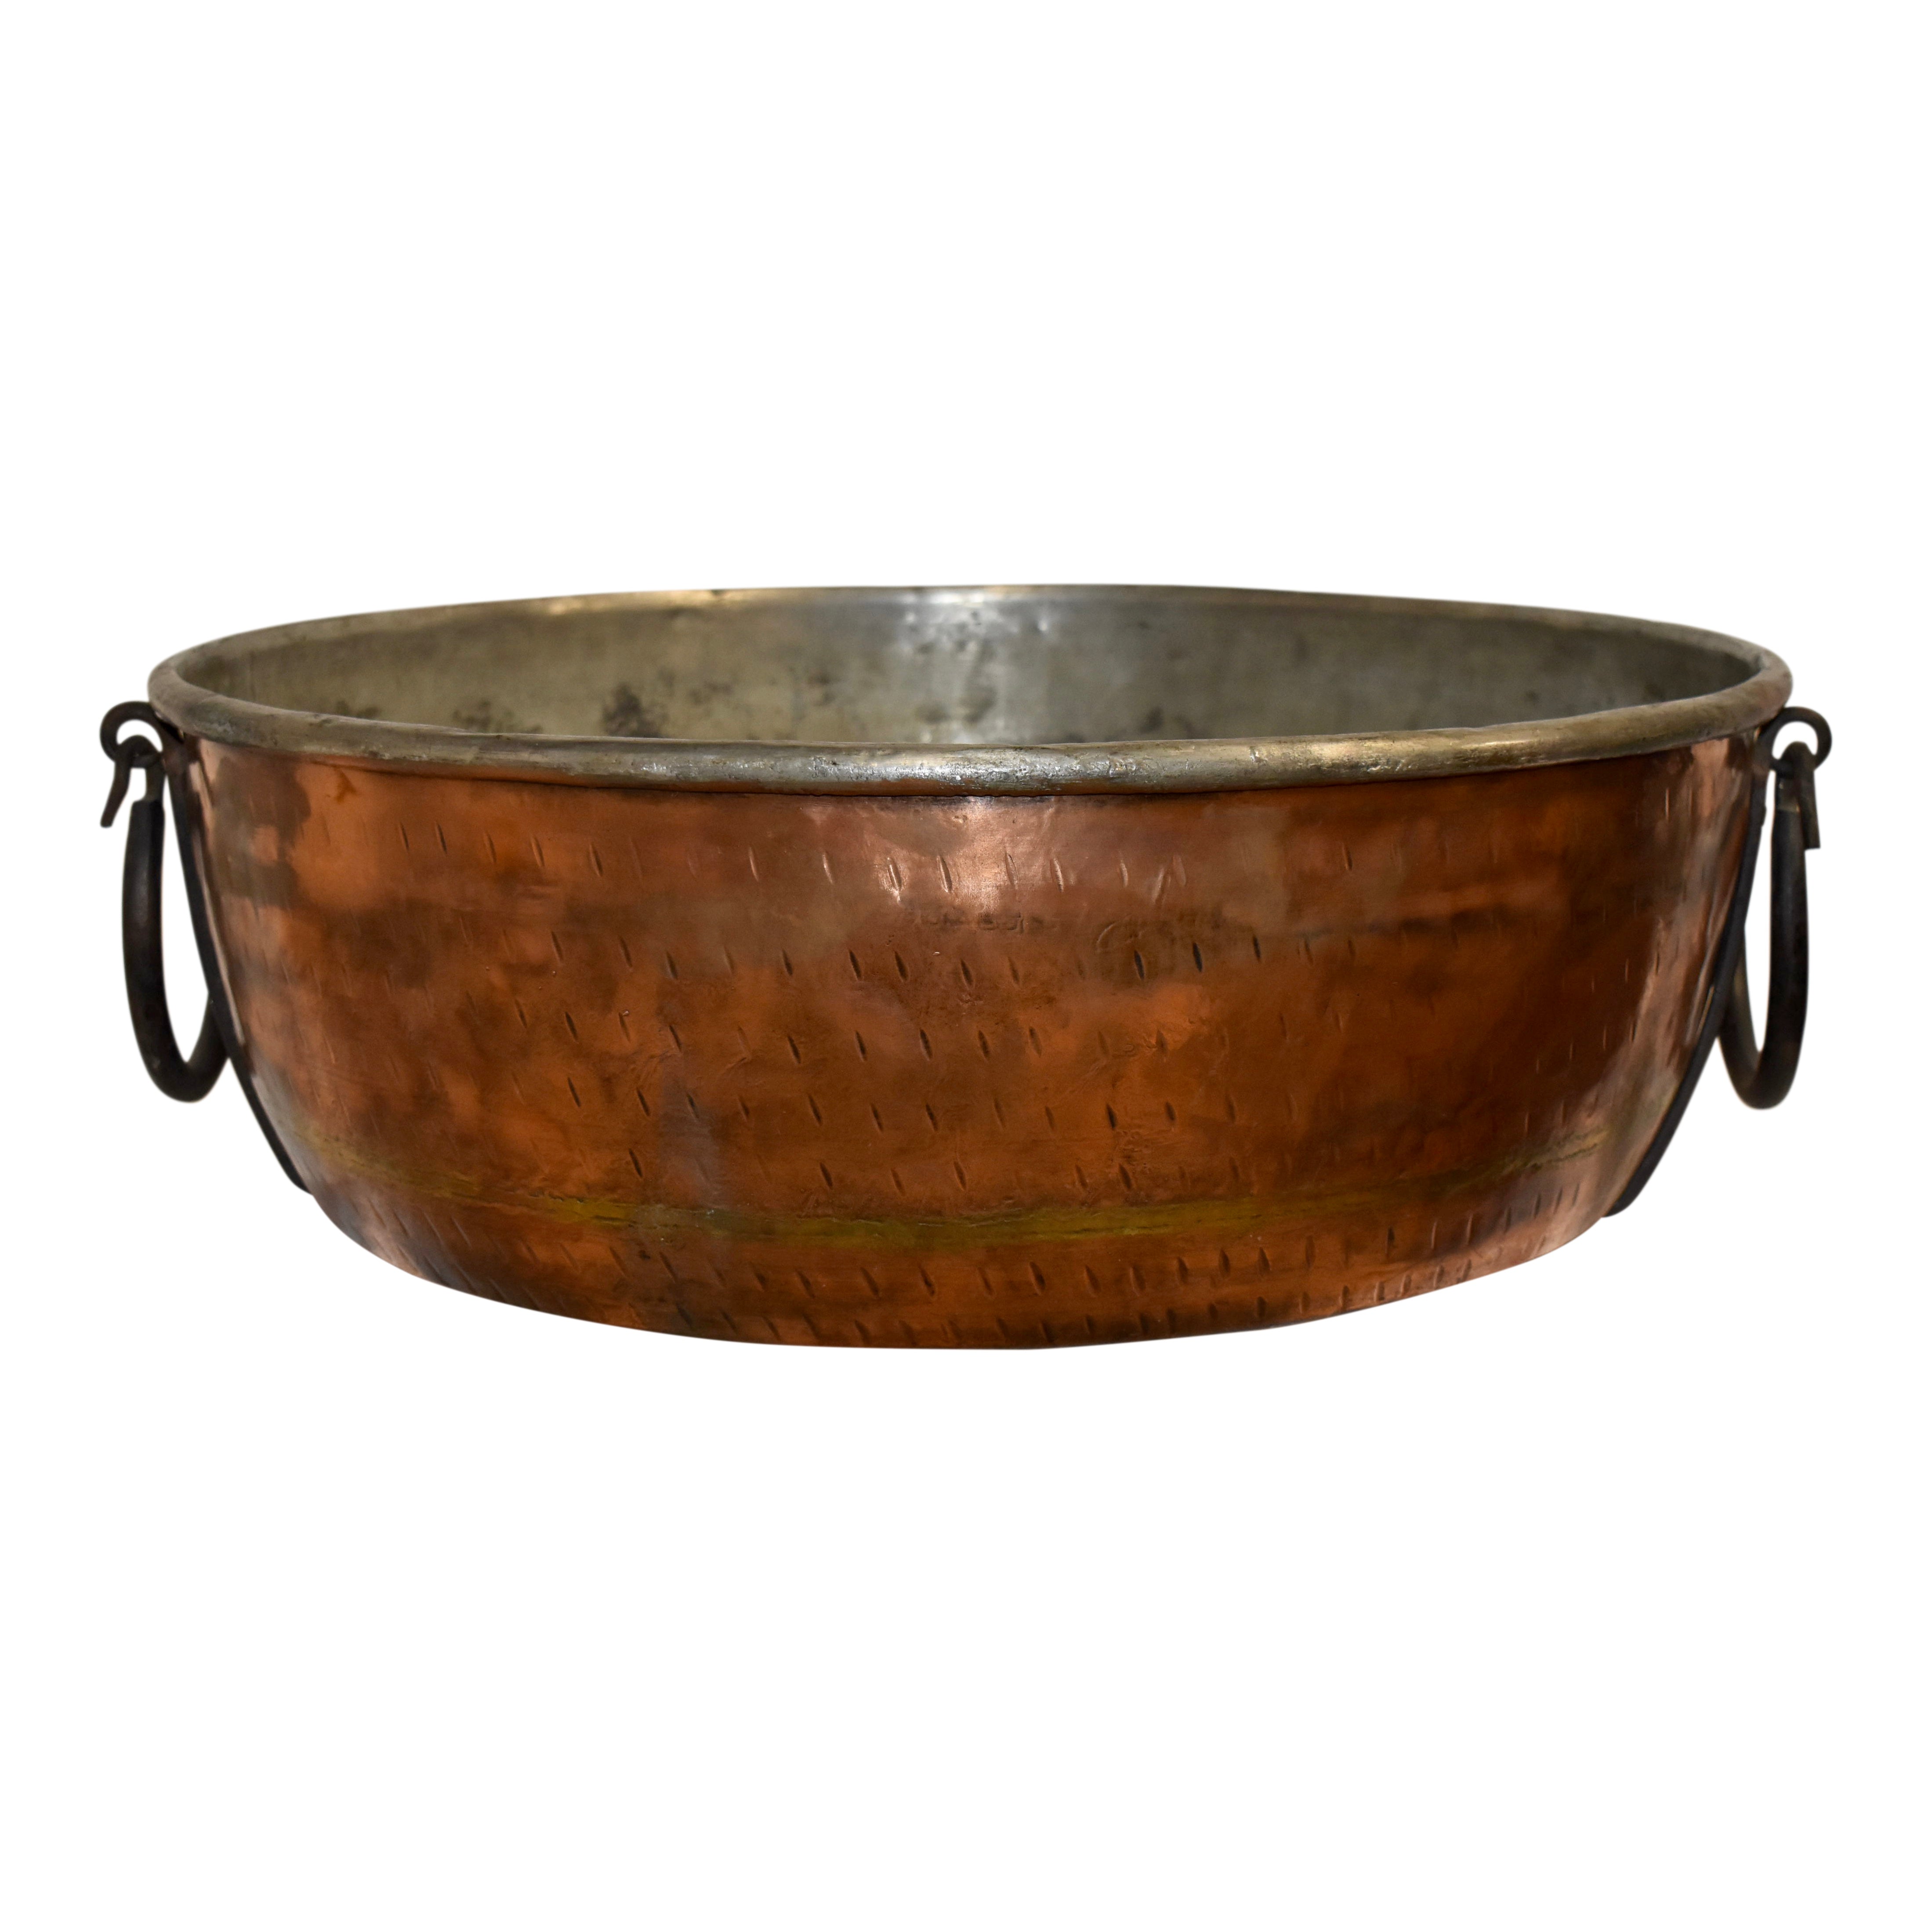 Copper Pot with Iron Handles